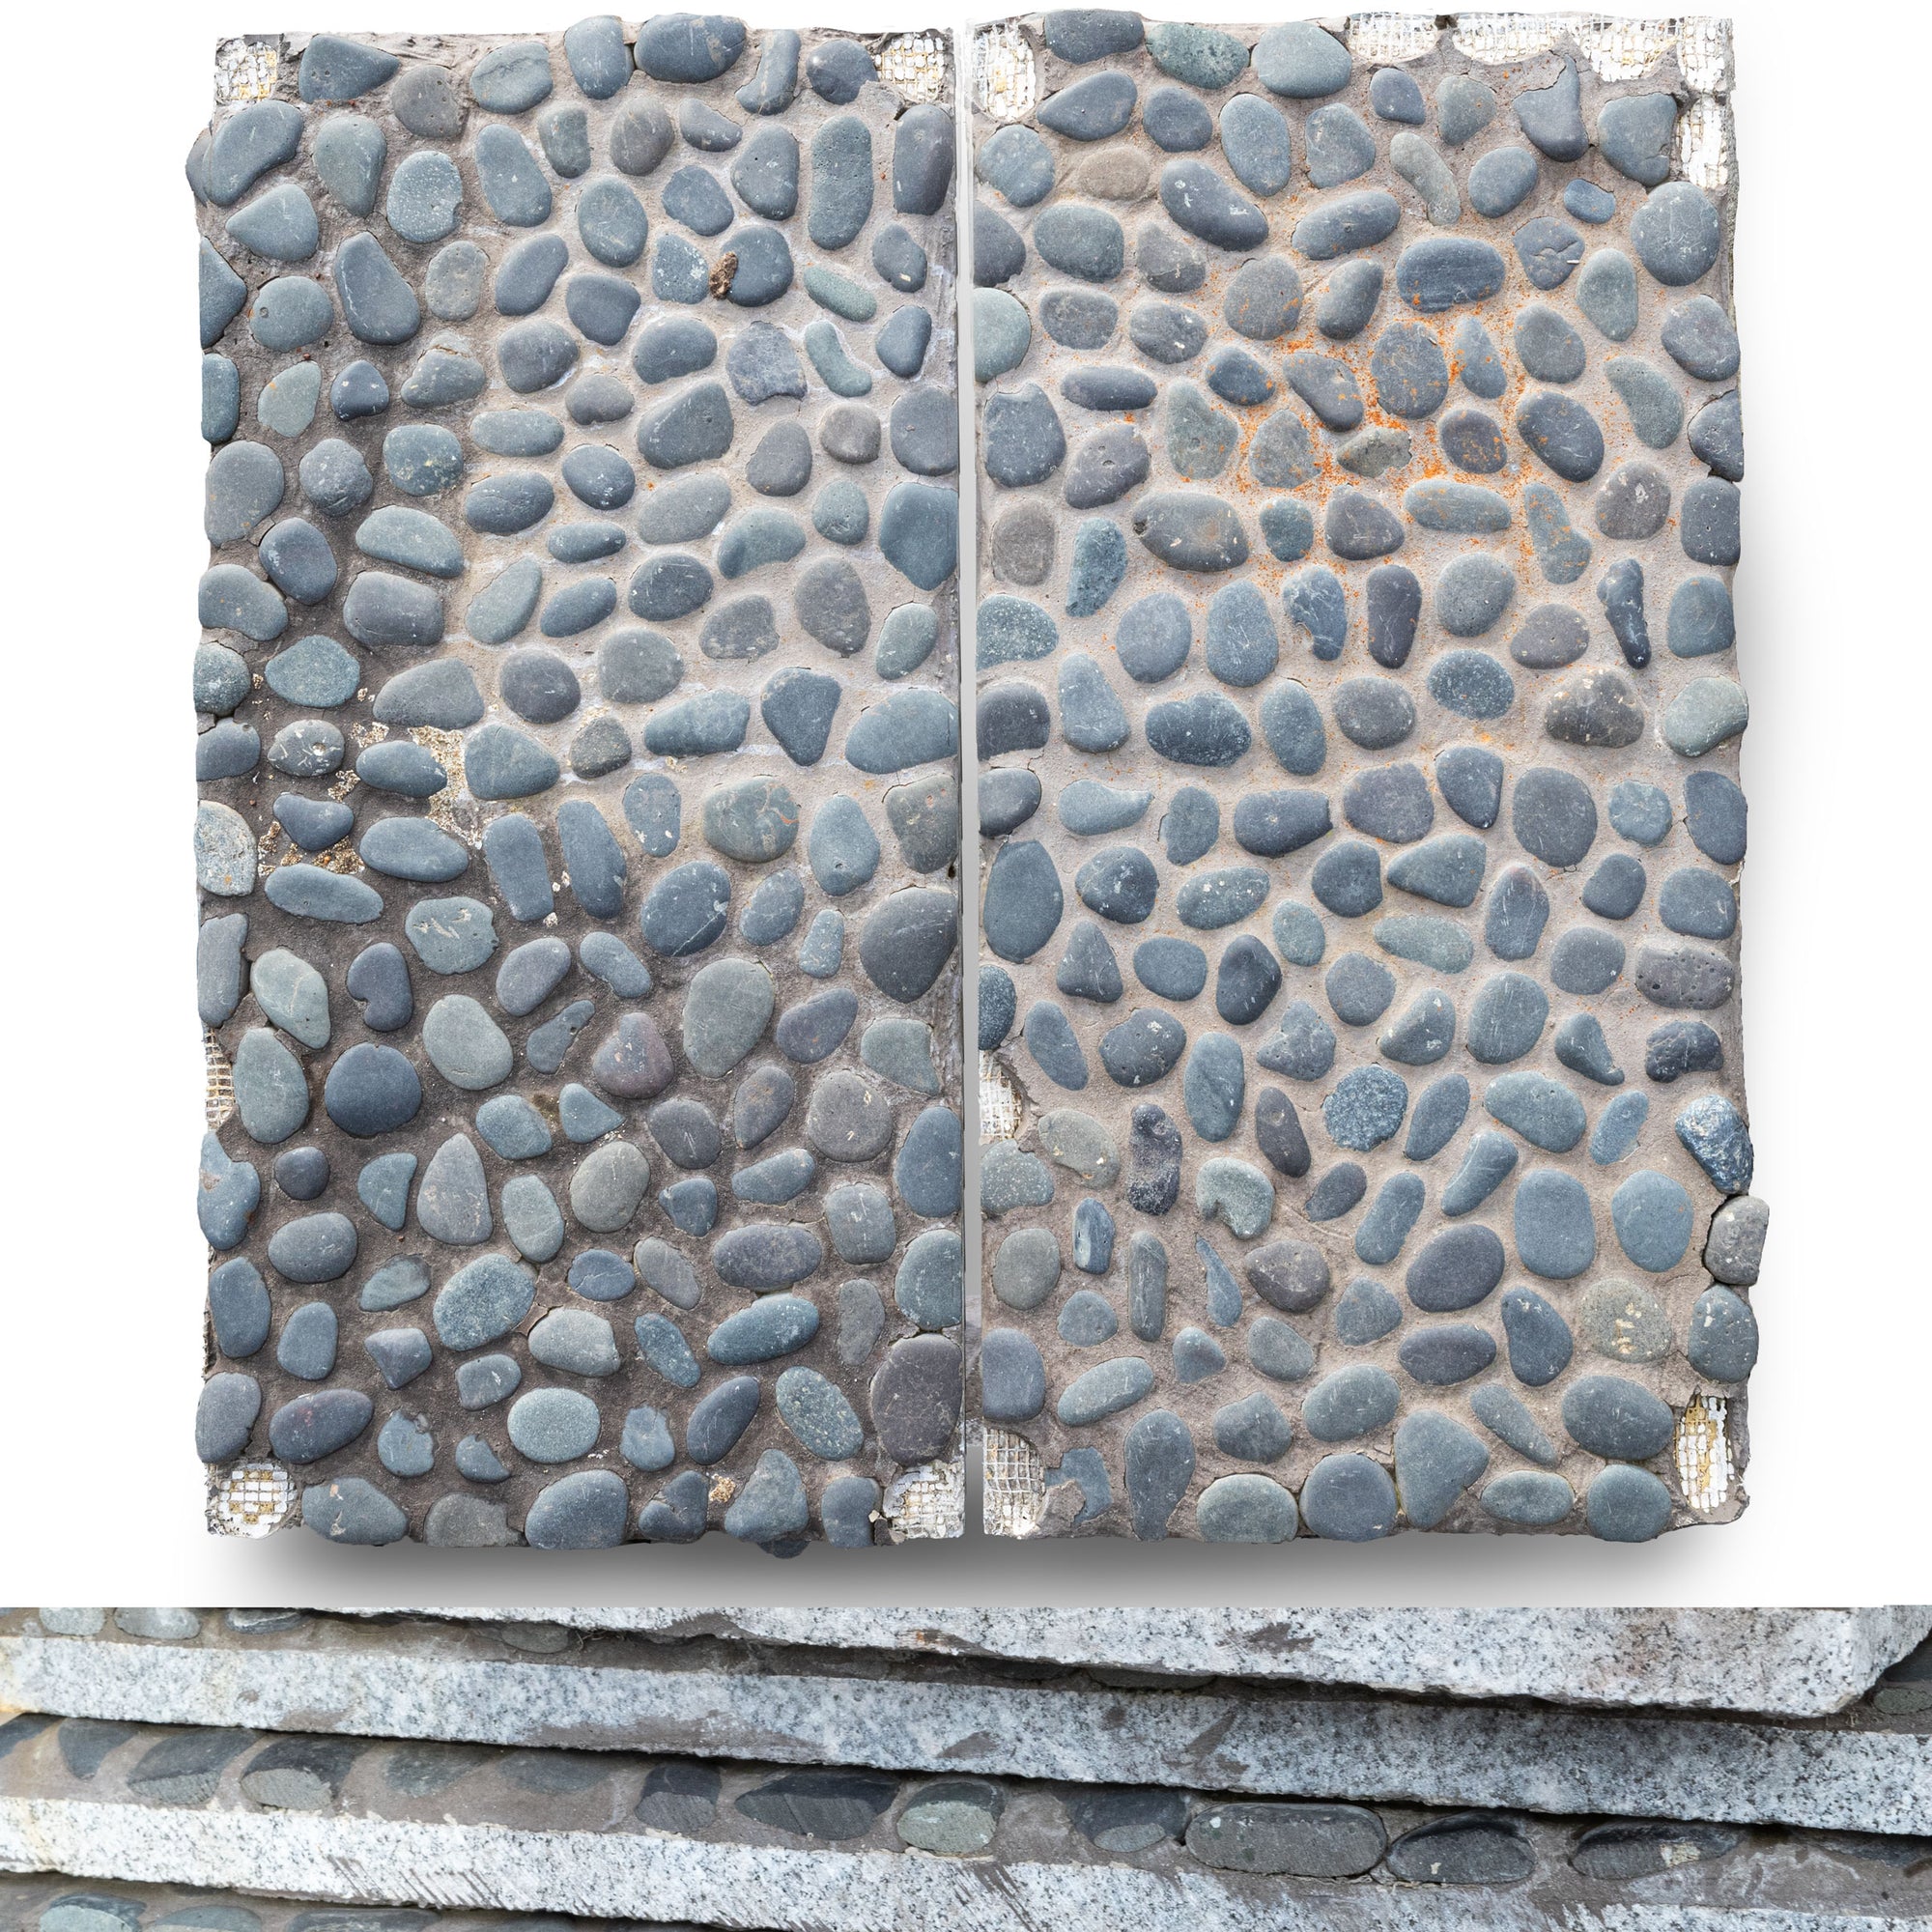 Reclaimed Granite Paving | Pebble Embedded Slabs | The Architectural Forum